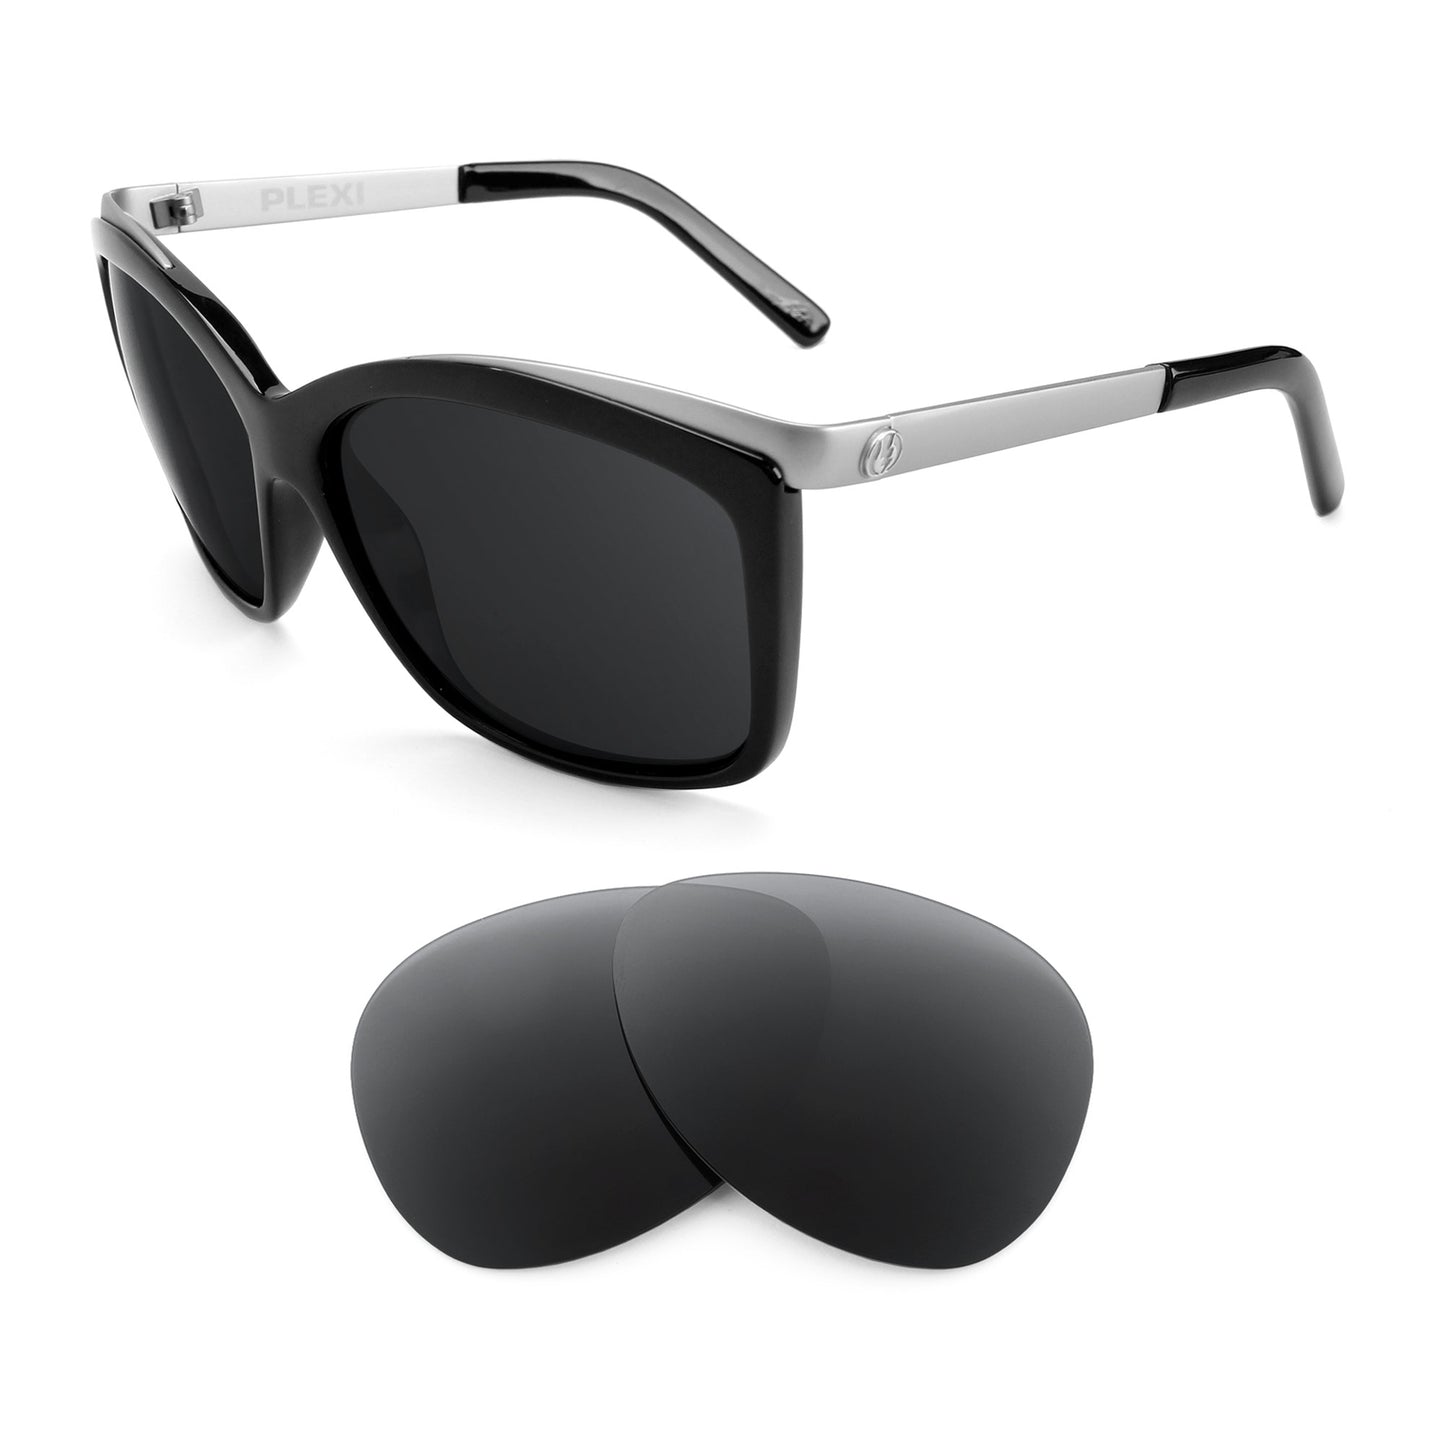 Electric Plexi sunglasses with replacement lenses